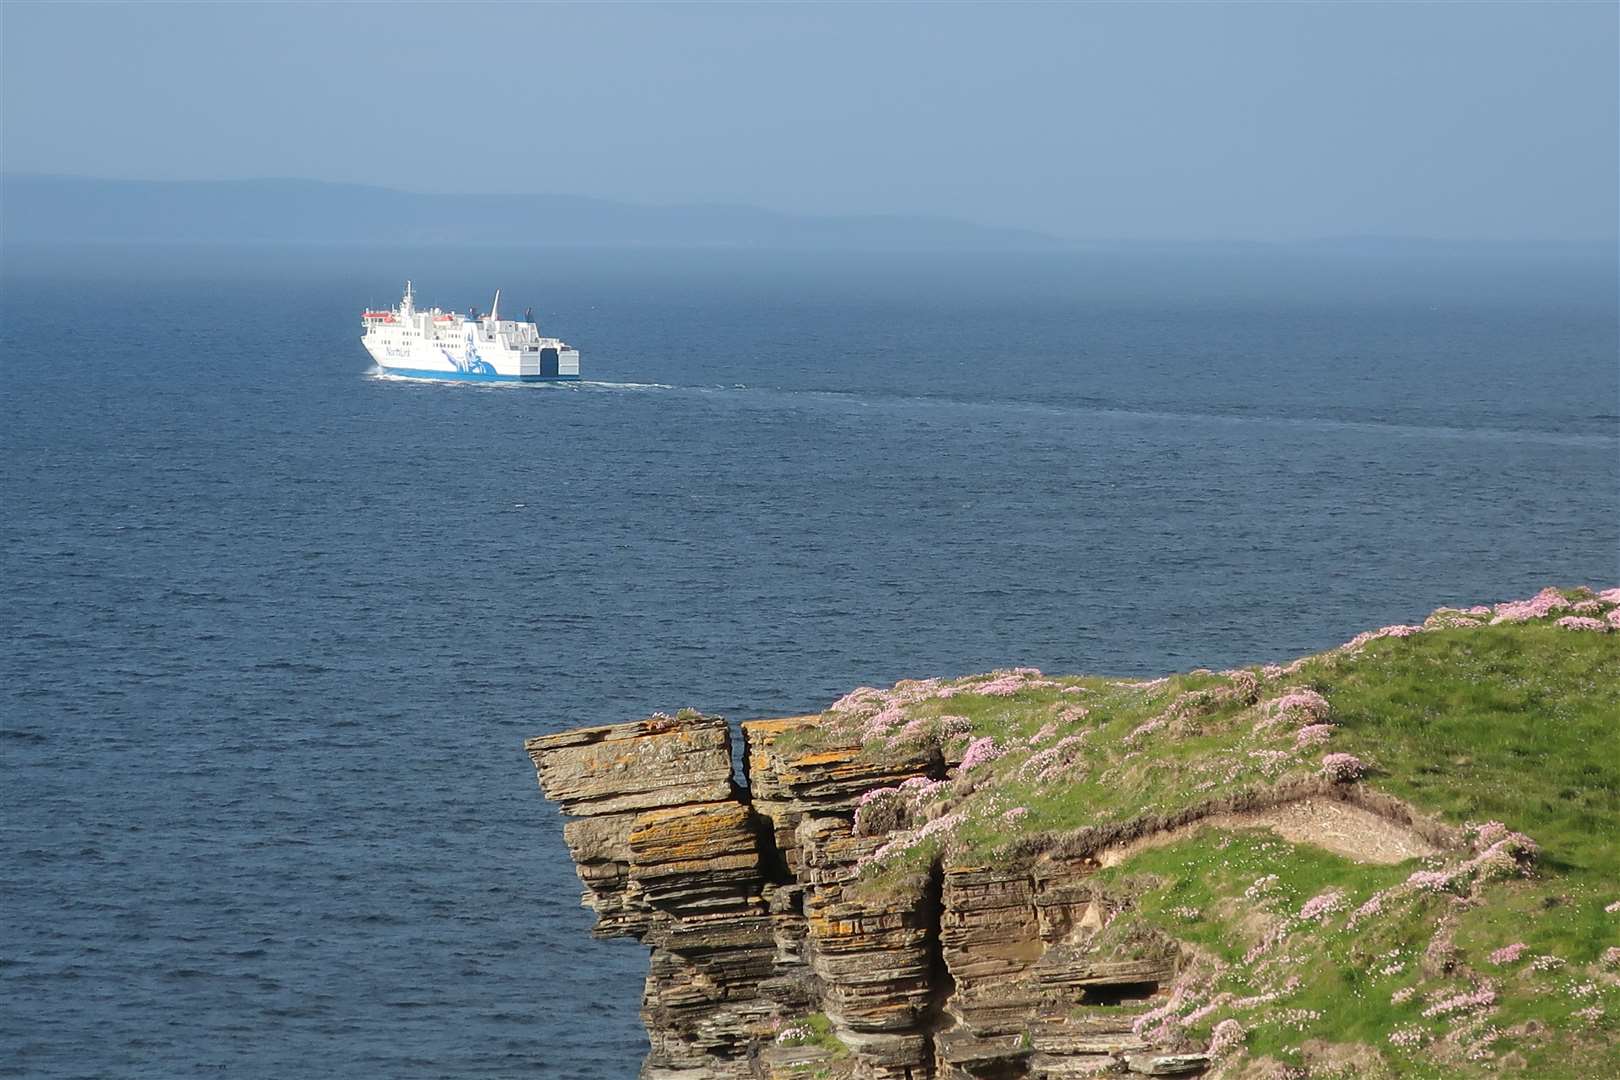 The NorthLink ferry heads out of Thurso Bay towards Orkney. Picture: John Davidson